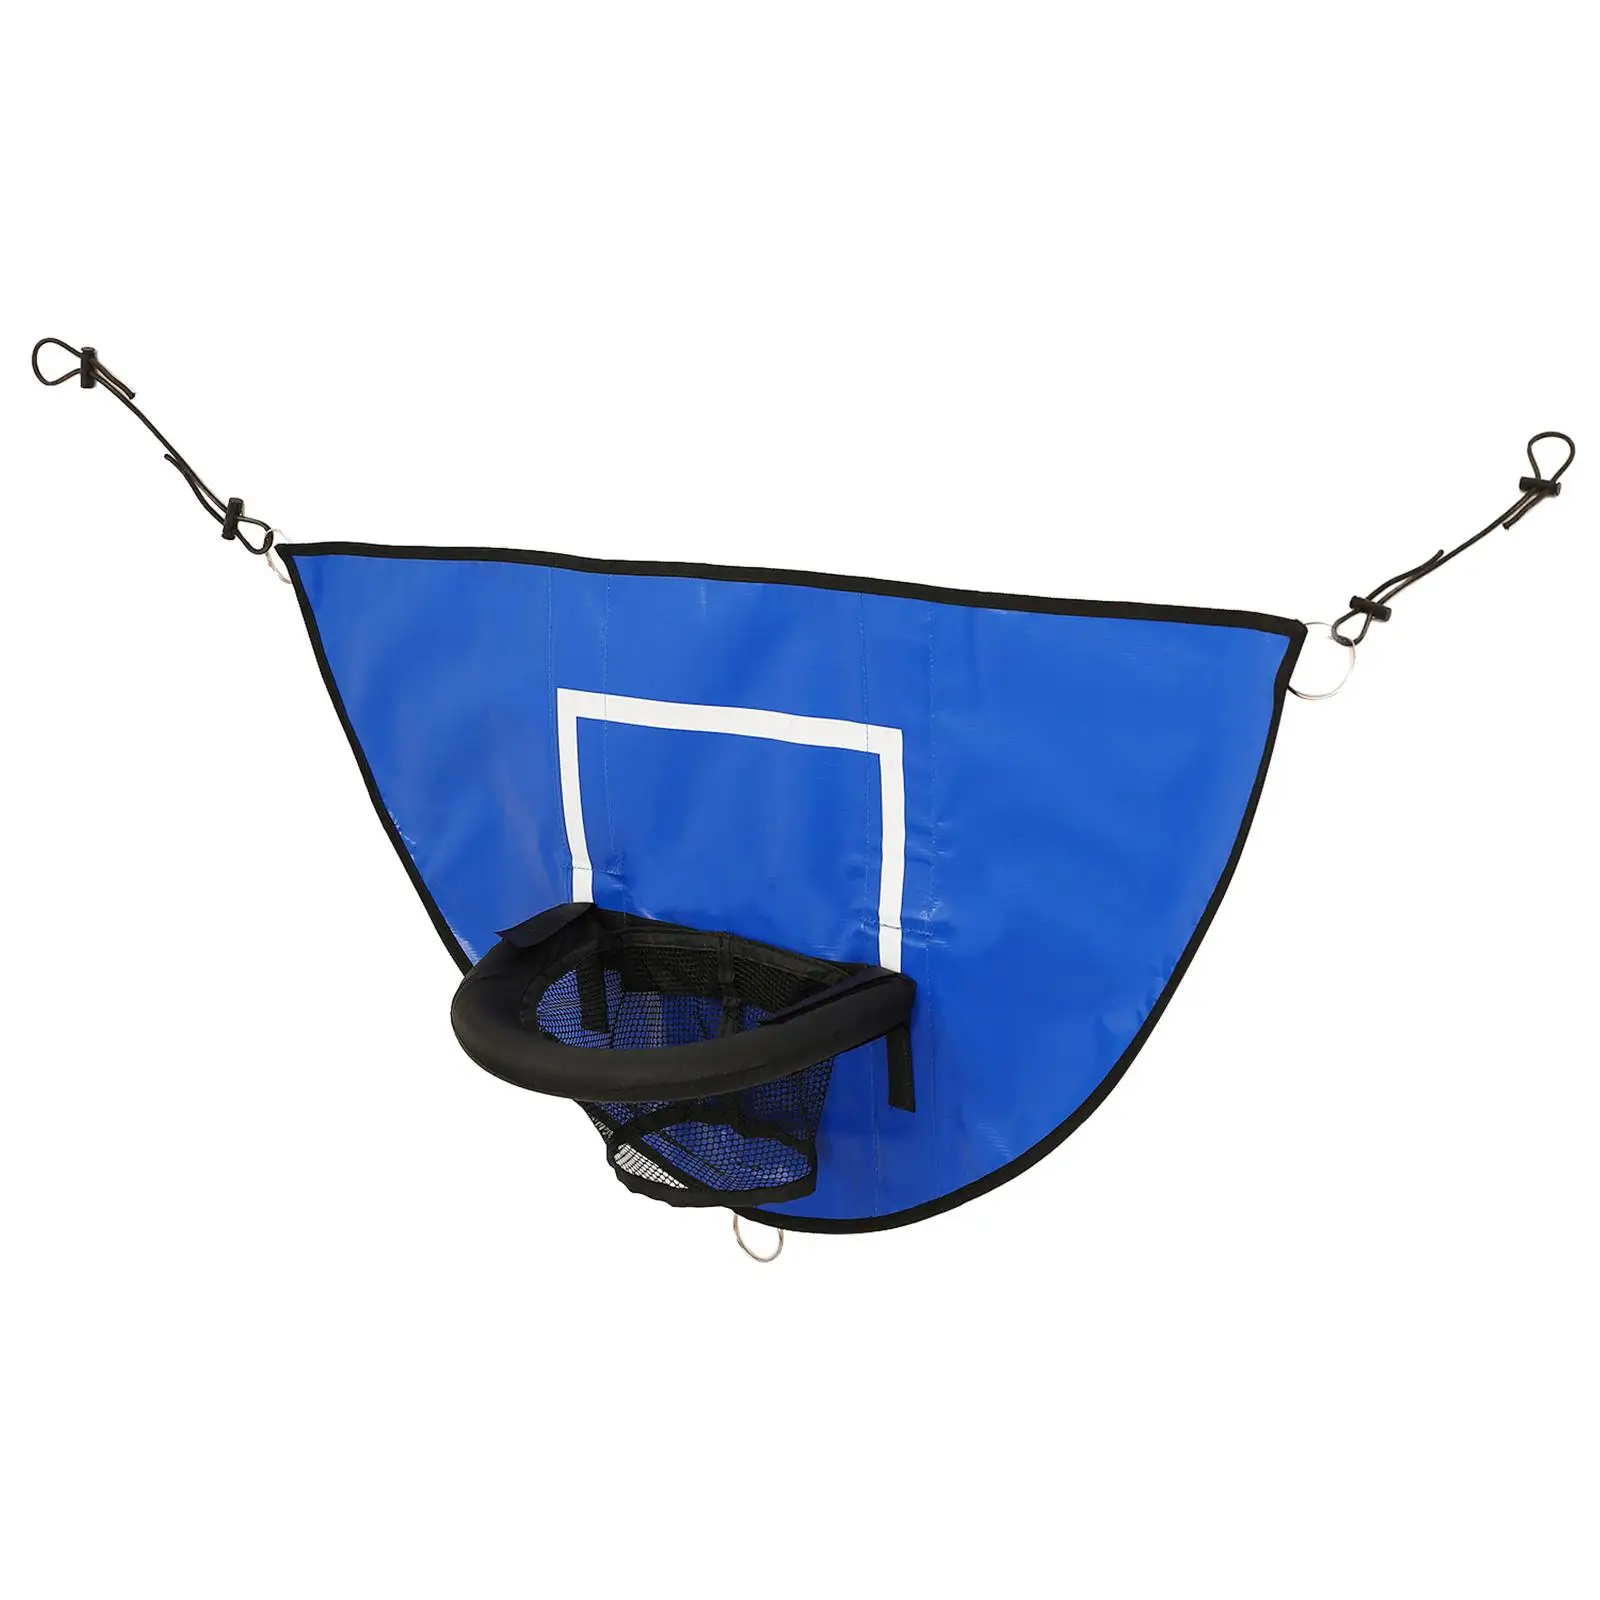 Basketball Hoop Attachment for Trampoline with Net Universal Baseboard for